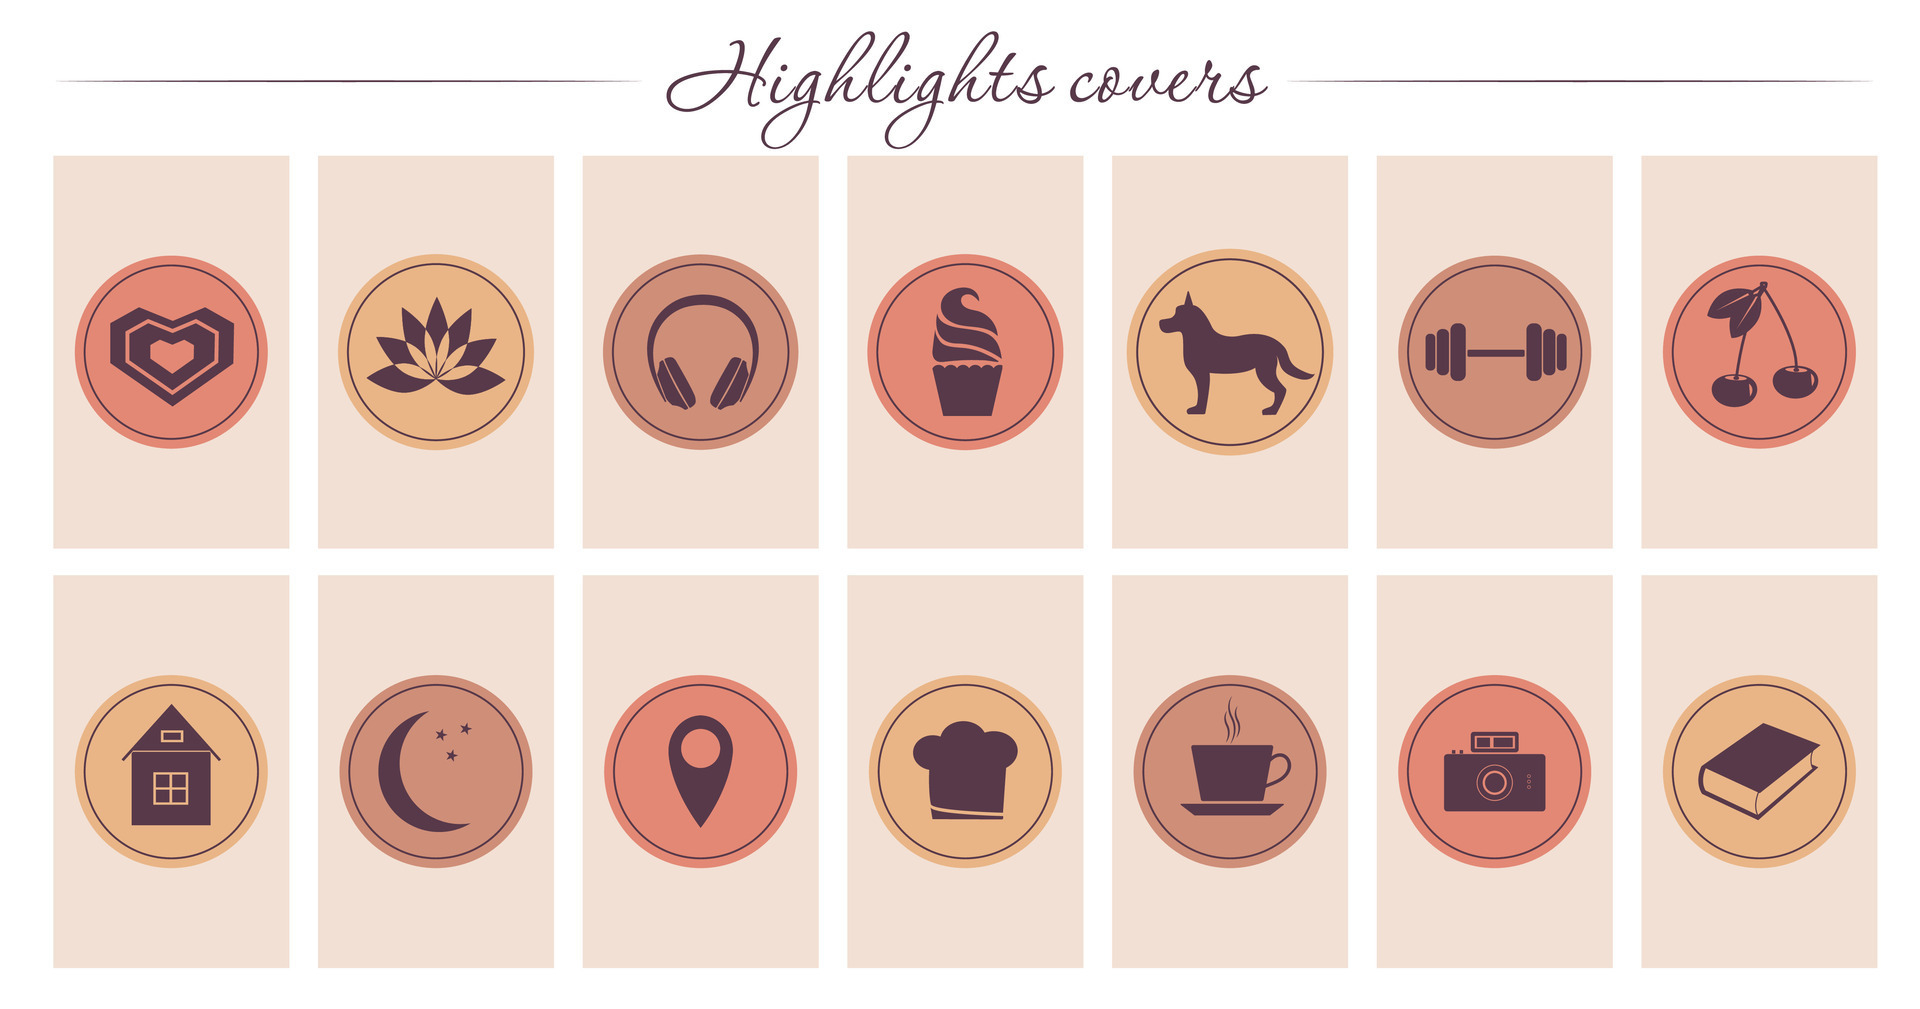 Highlights covers. Instagram stories icons for hime, gym, pets